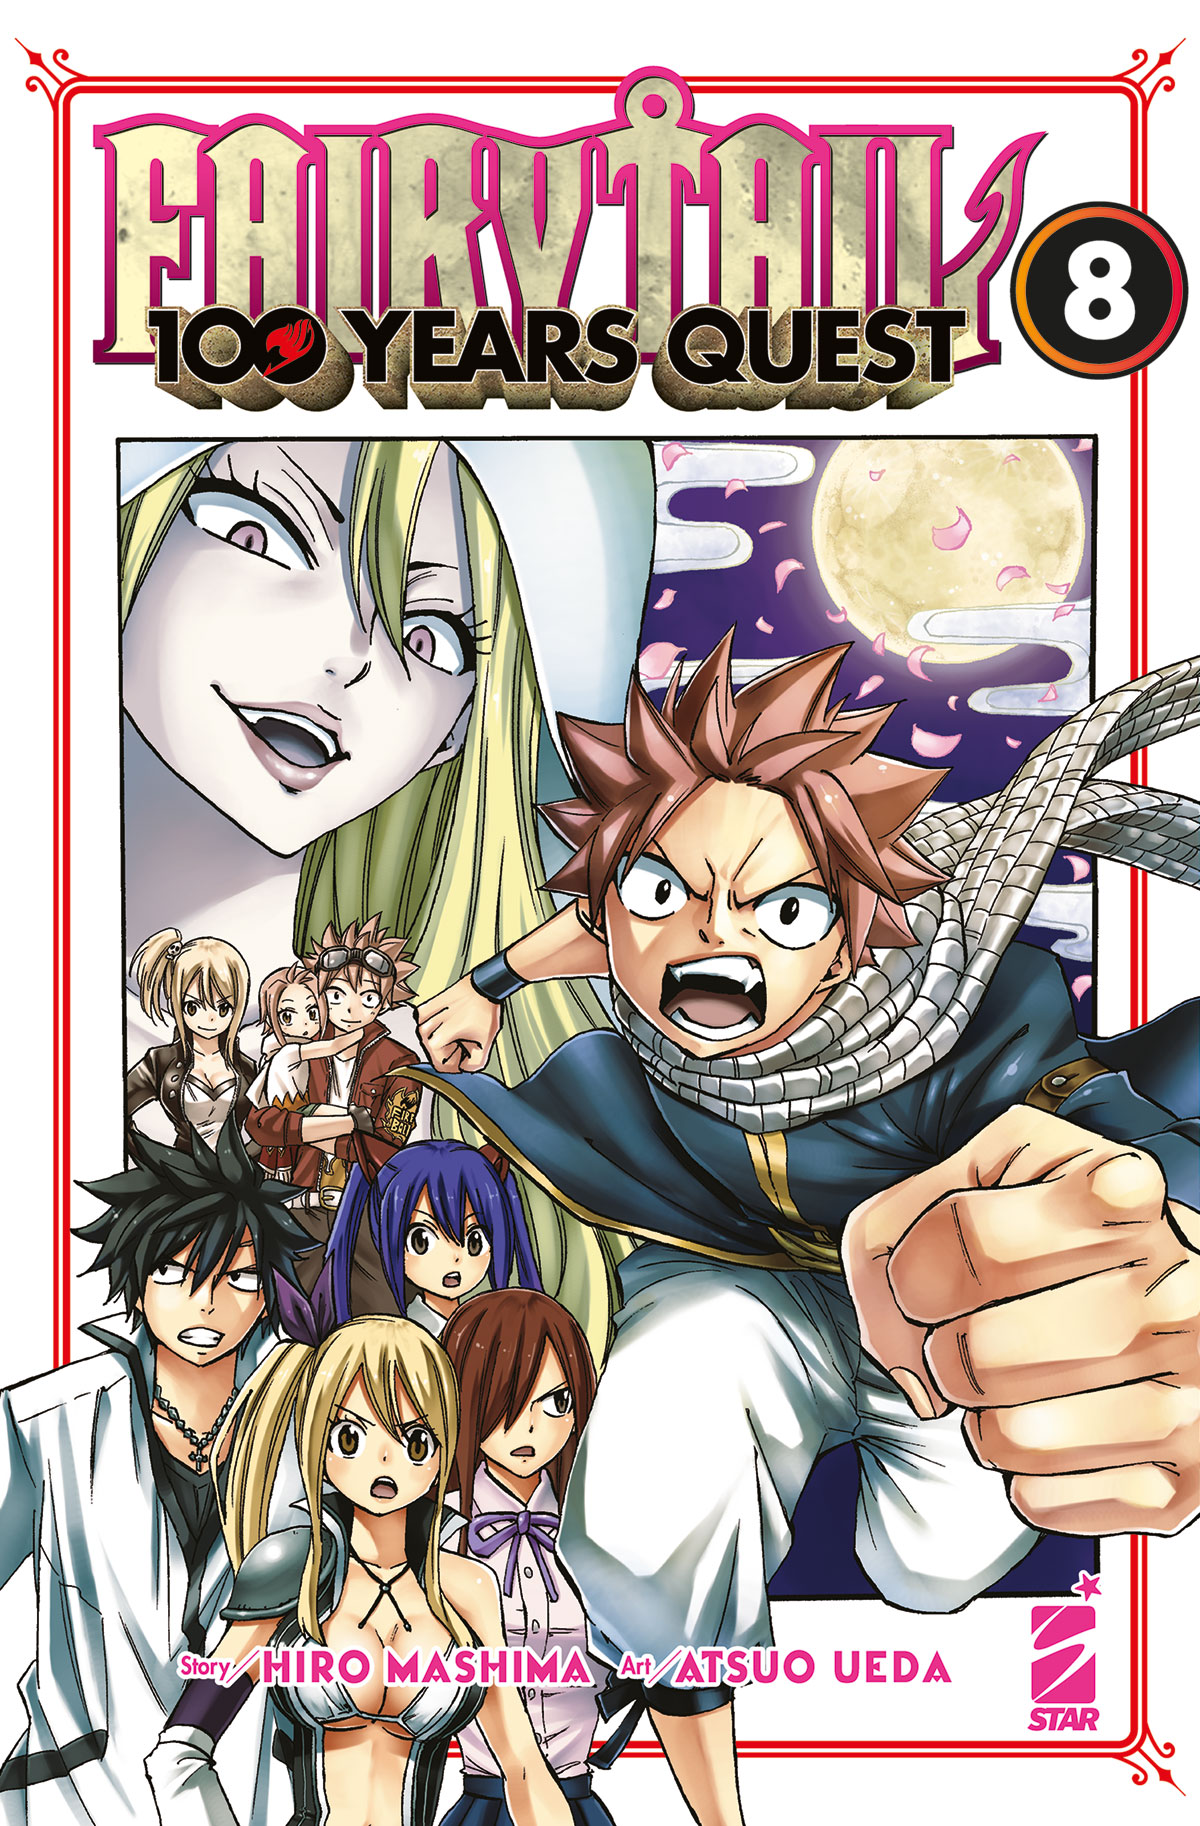 YOUNG #326 FAIRY TAIL 100 YEARS QUEST N.08